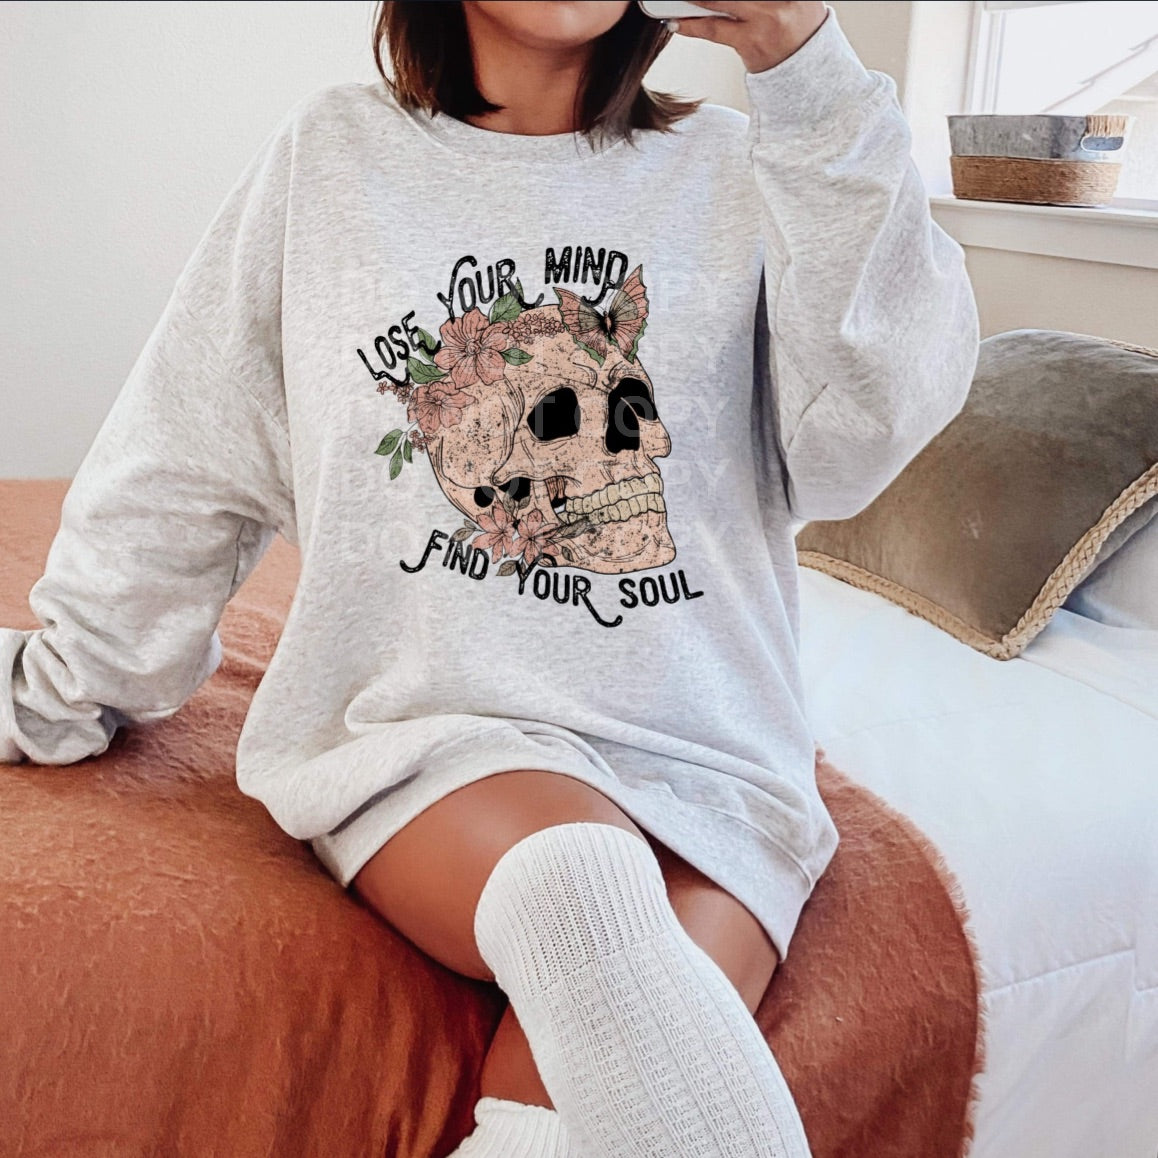 Lose Your Mind Find Your Soul Graphic Tee or Sweatshirt - Bella Lia Boutique